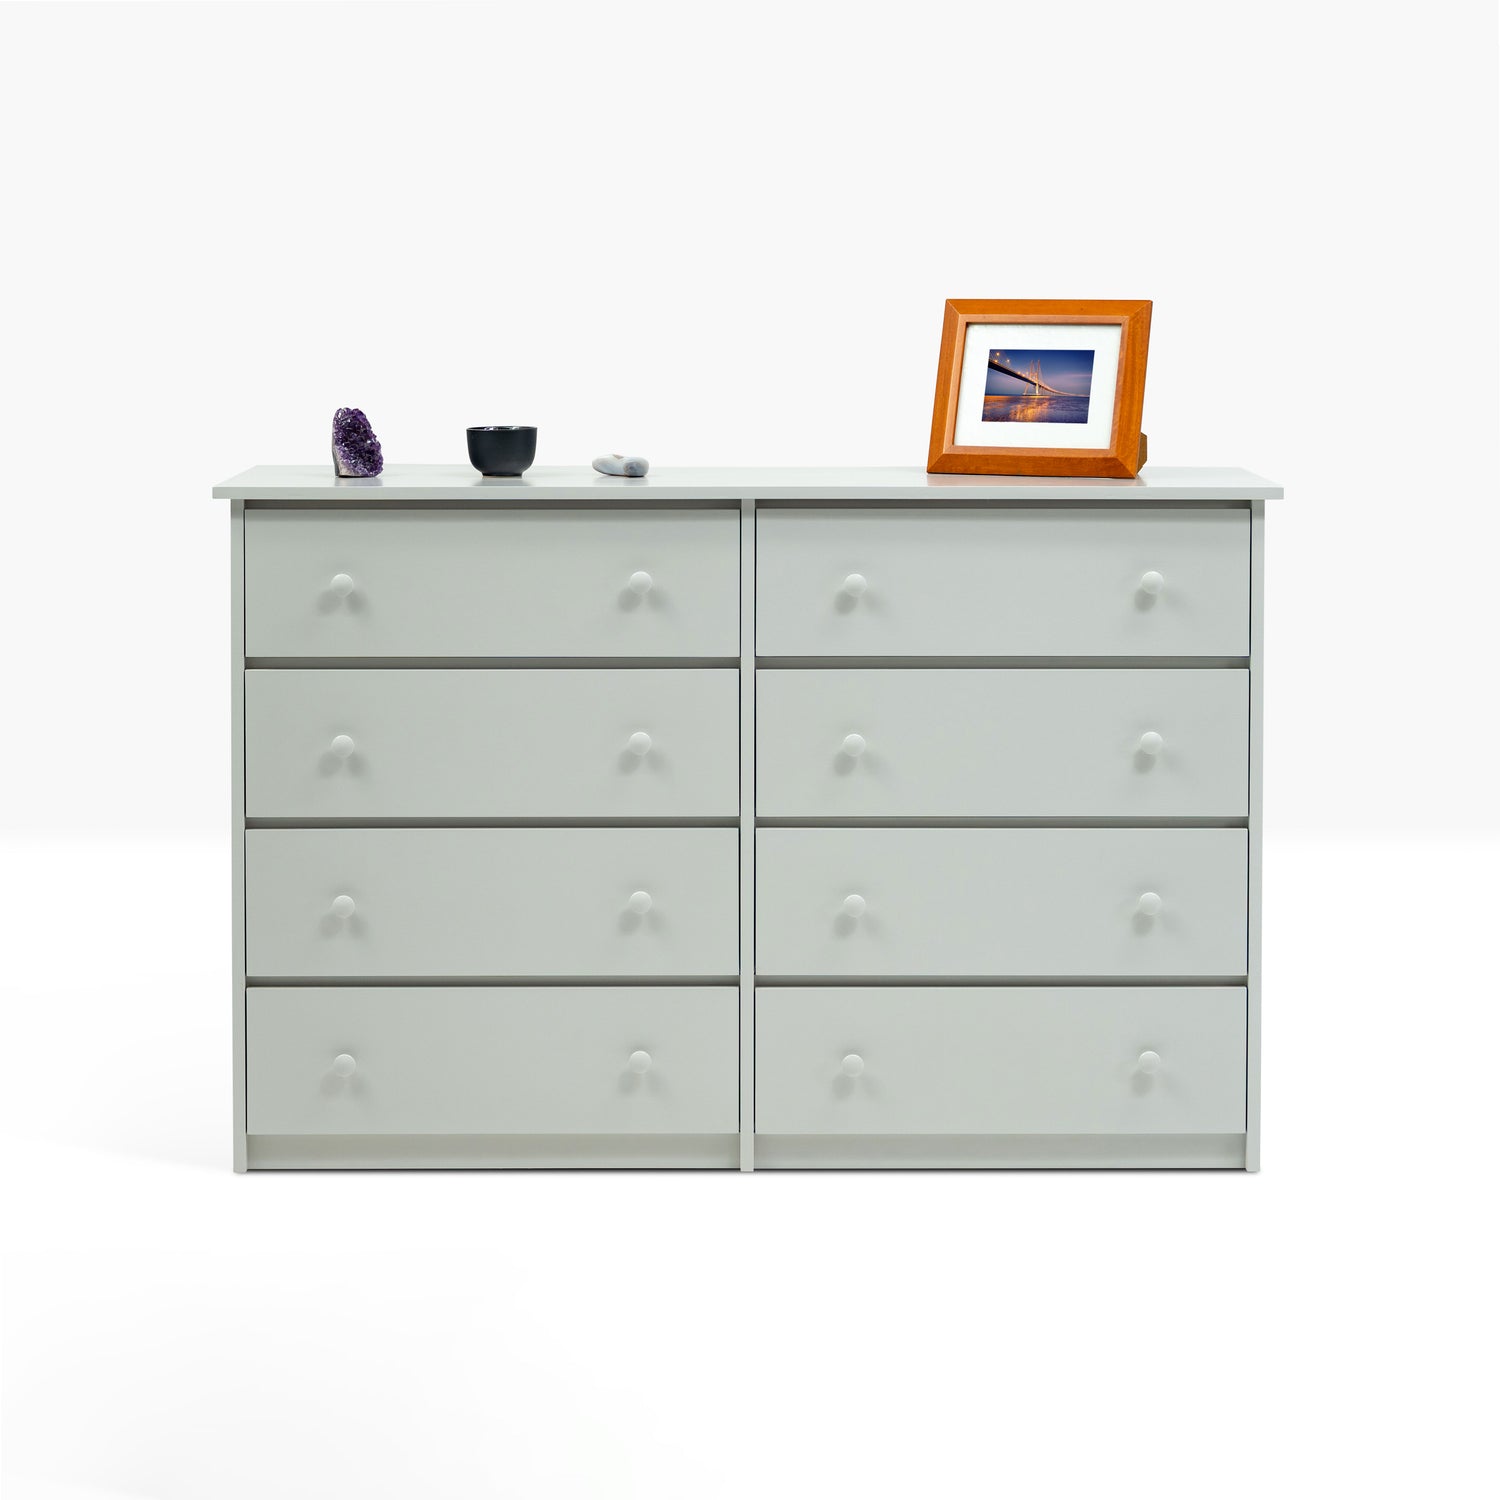 Eight drawer dresser with wood knobs shown from the front in light gray paint color.